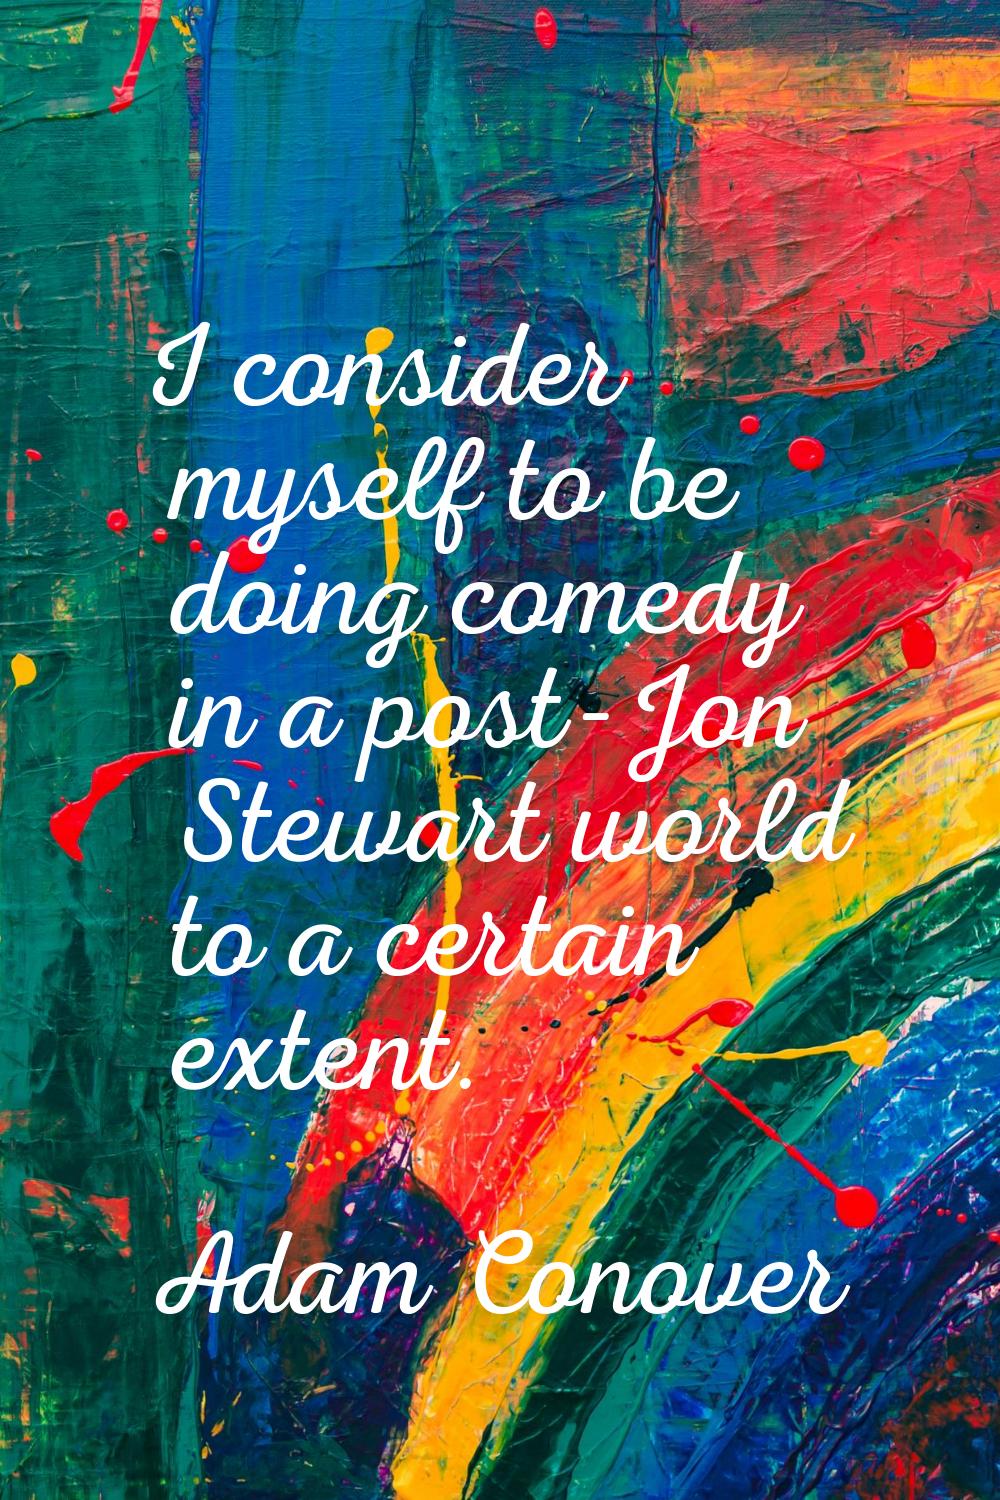 I consider myself to be doing comedy in a post-Jon Stewart world to a certain extent.